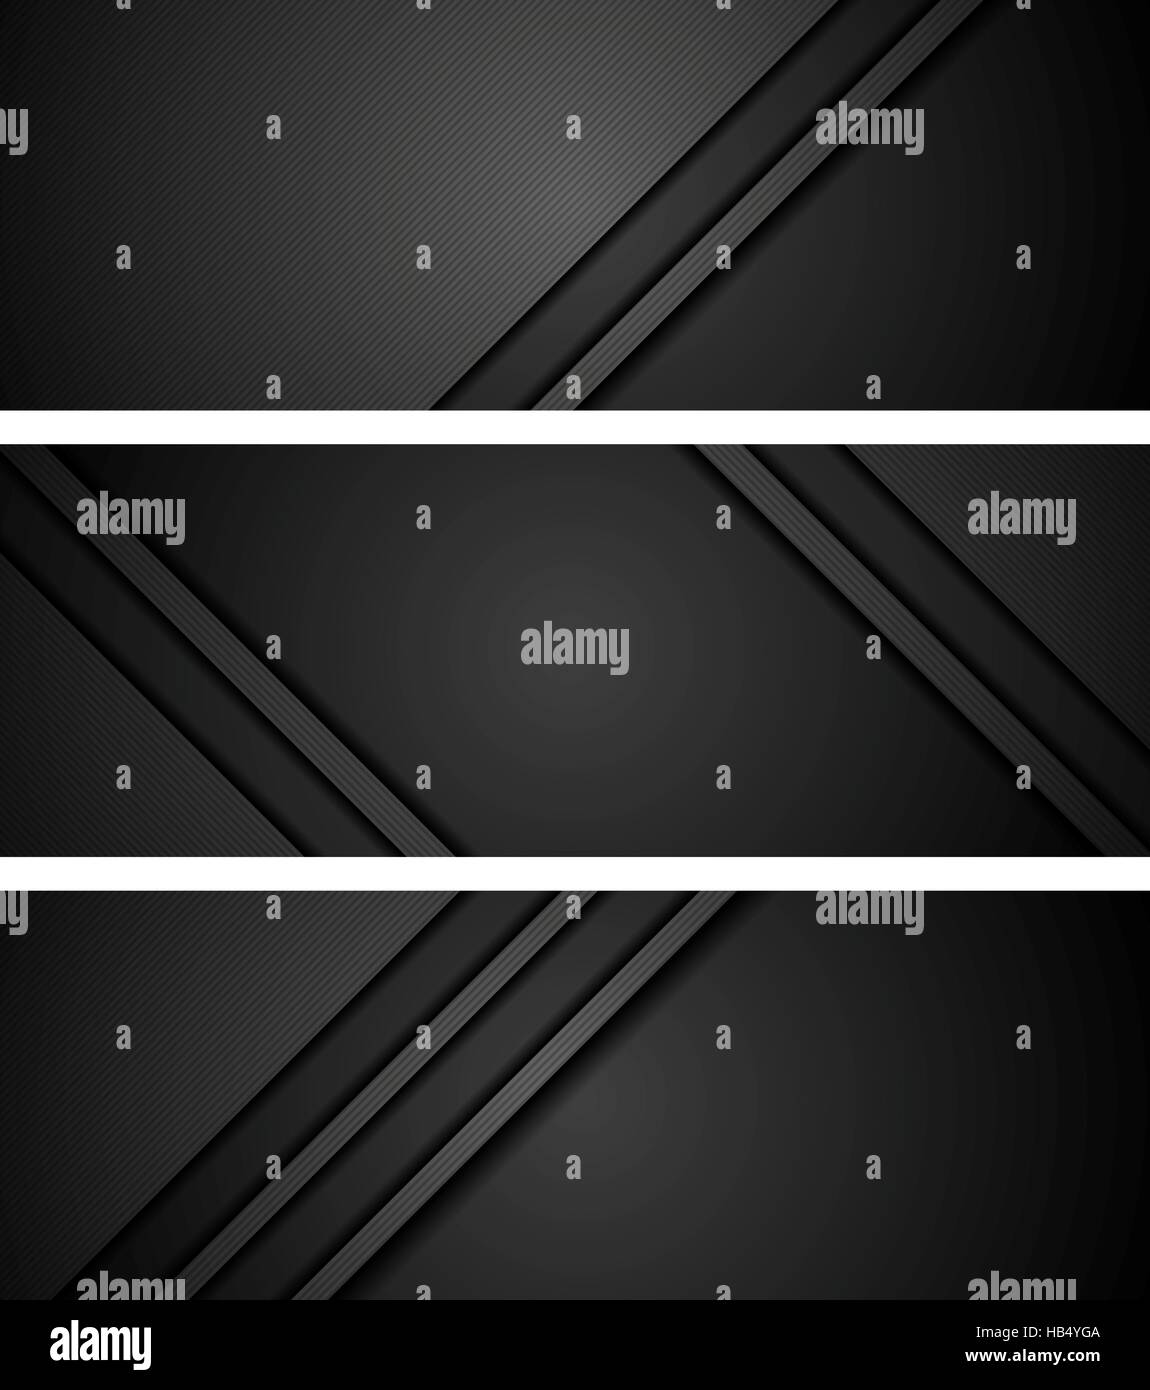 Abstract black tech concept banners Stock Photo